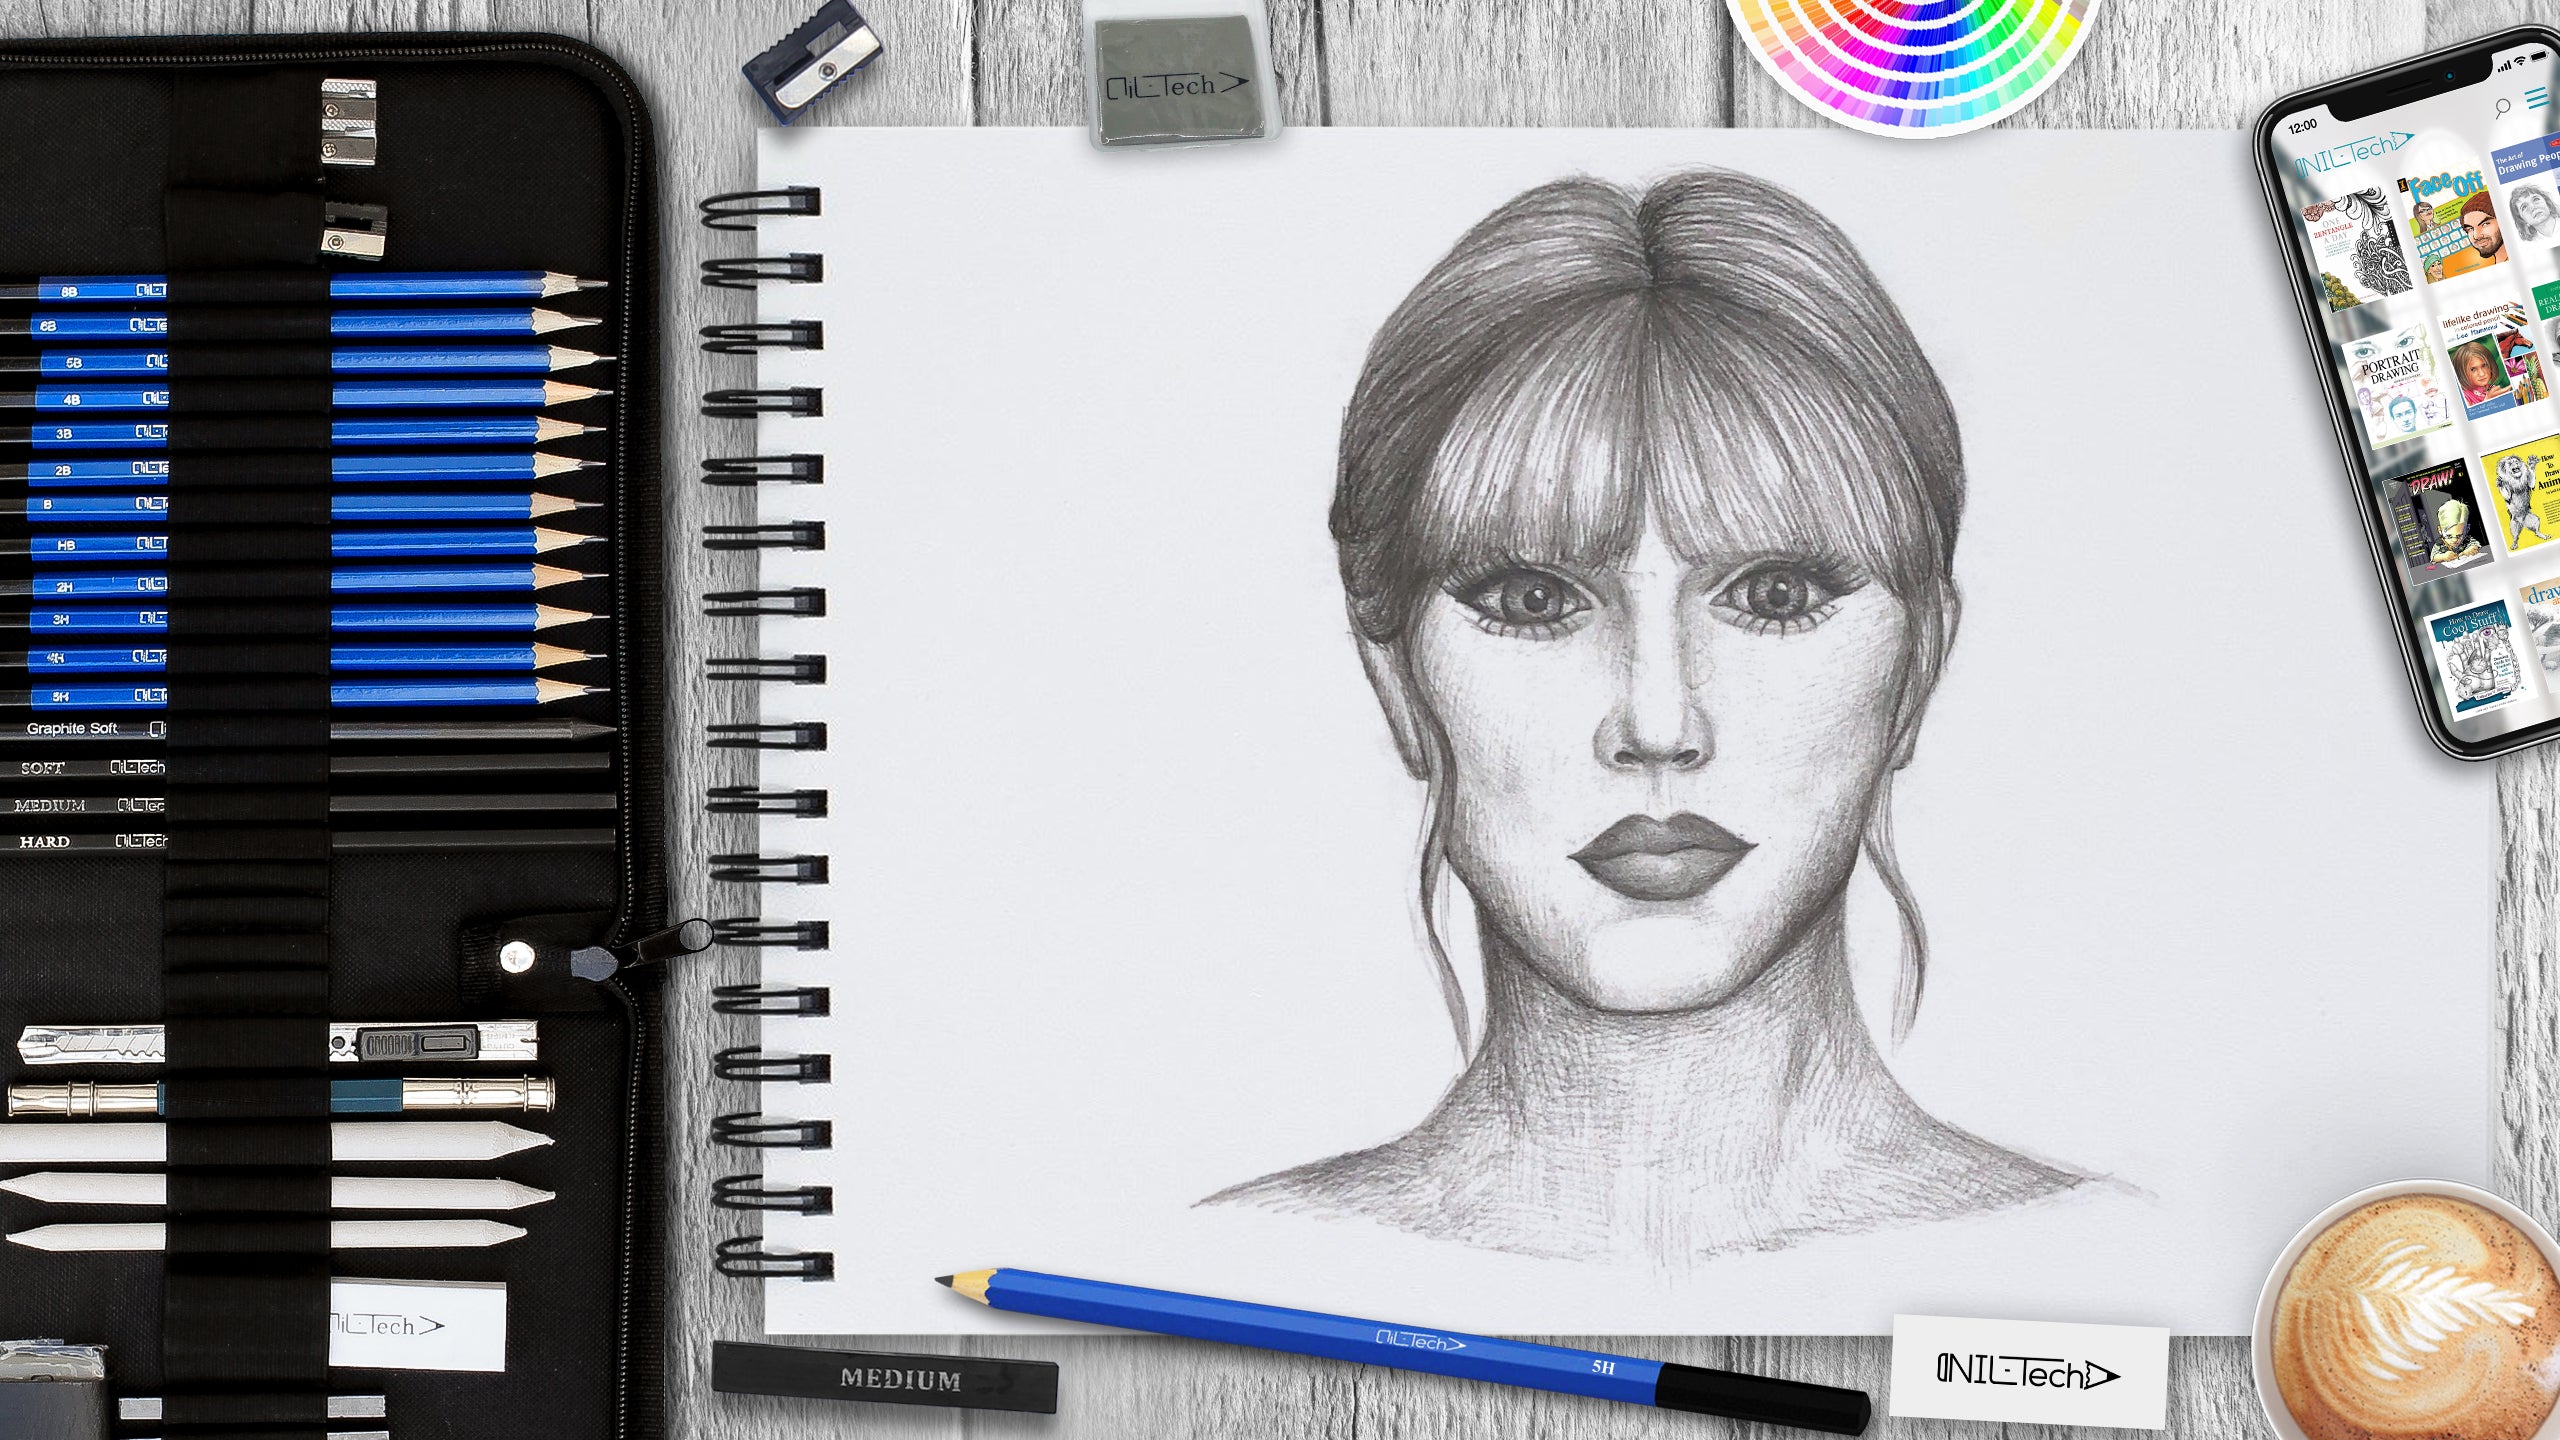 Taylor Swift  07mm mechanical pencil taylorswift  Celebrity drawings  Portrait sketches Taylor swift drawing